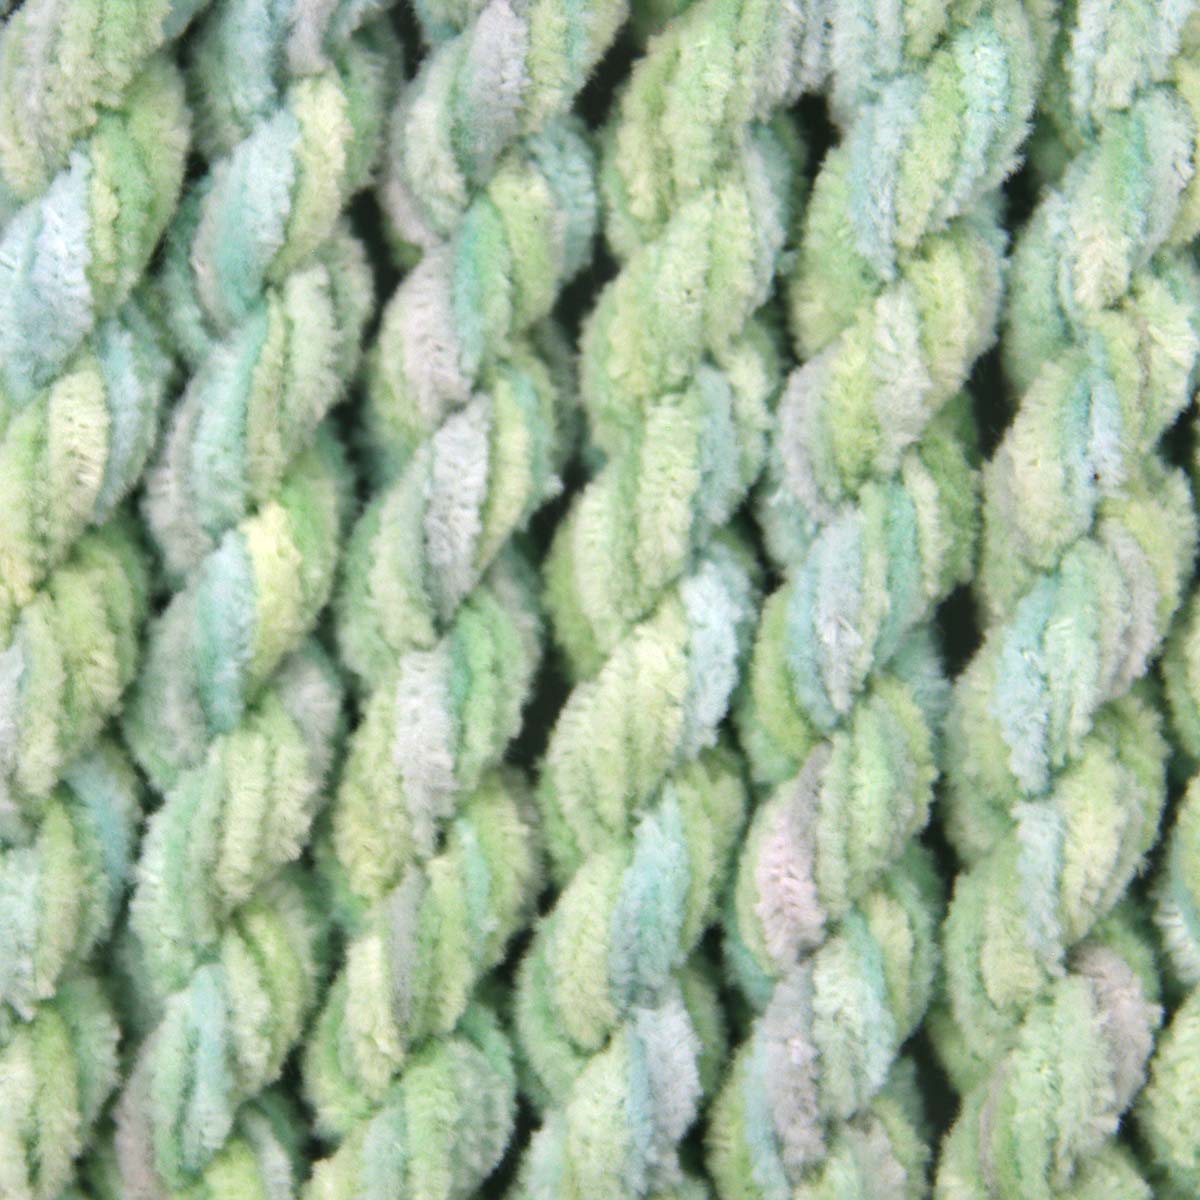 www.colourstreams.com.au Colour Streams Hand Dyed Chenille Threads Slow Stitch Embroidery Textile Arts Fibre DL 11 Meadow  Greens